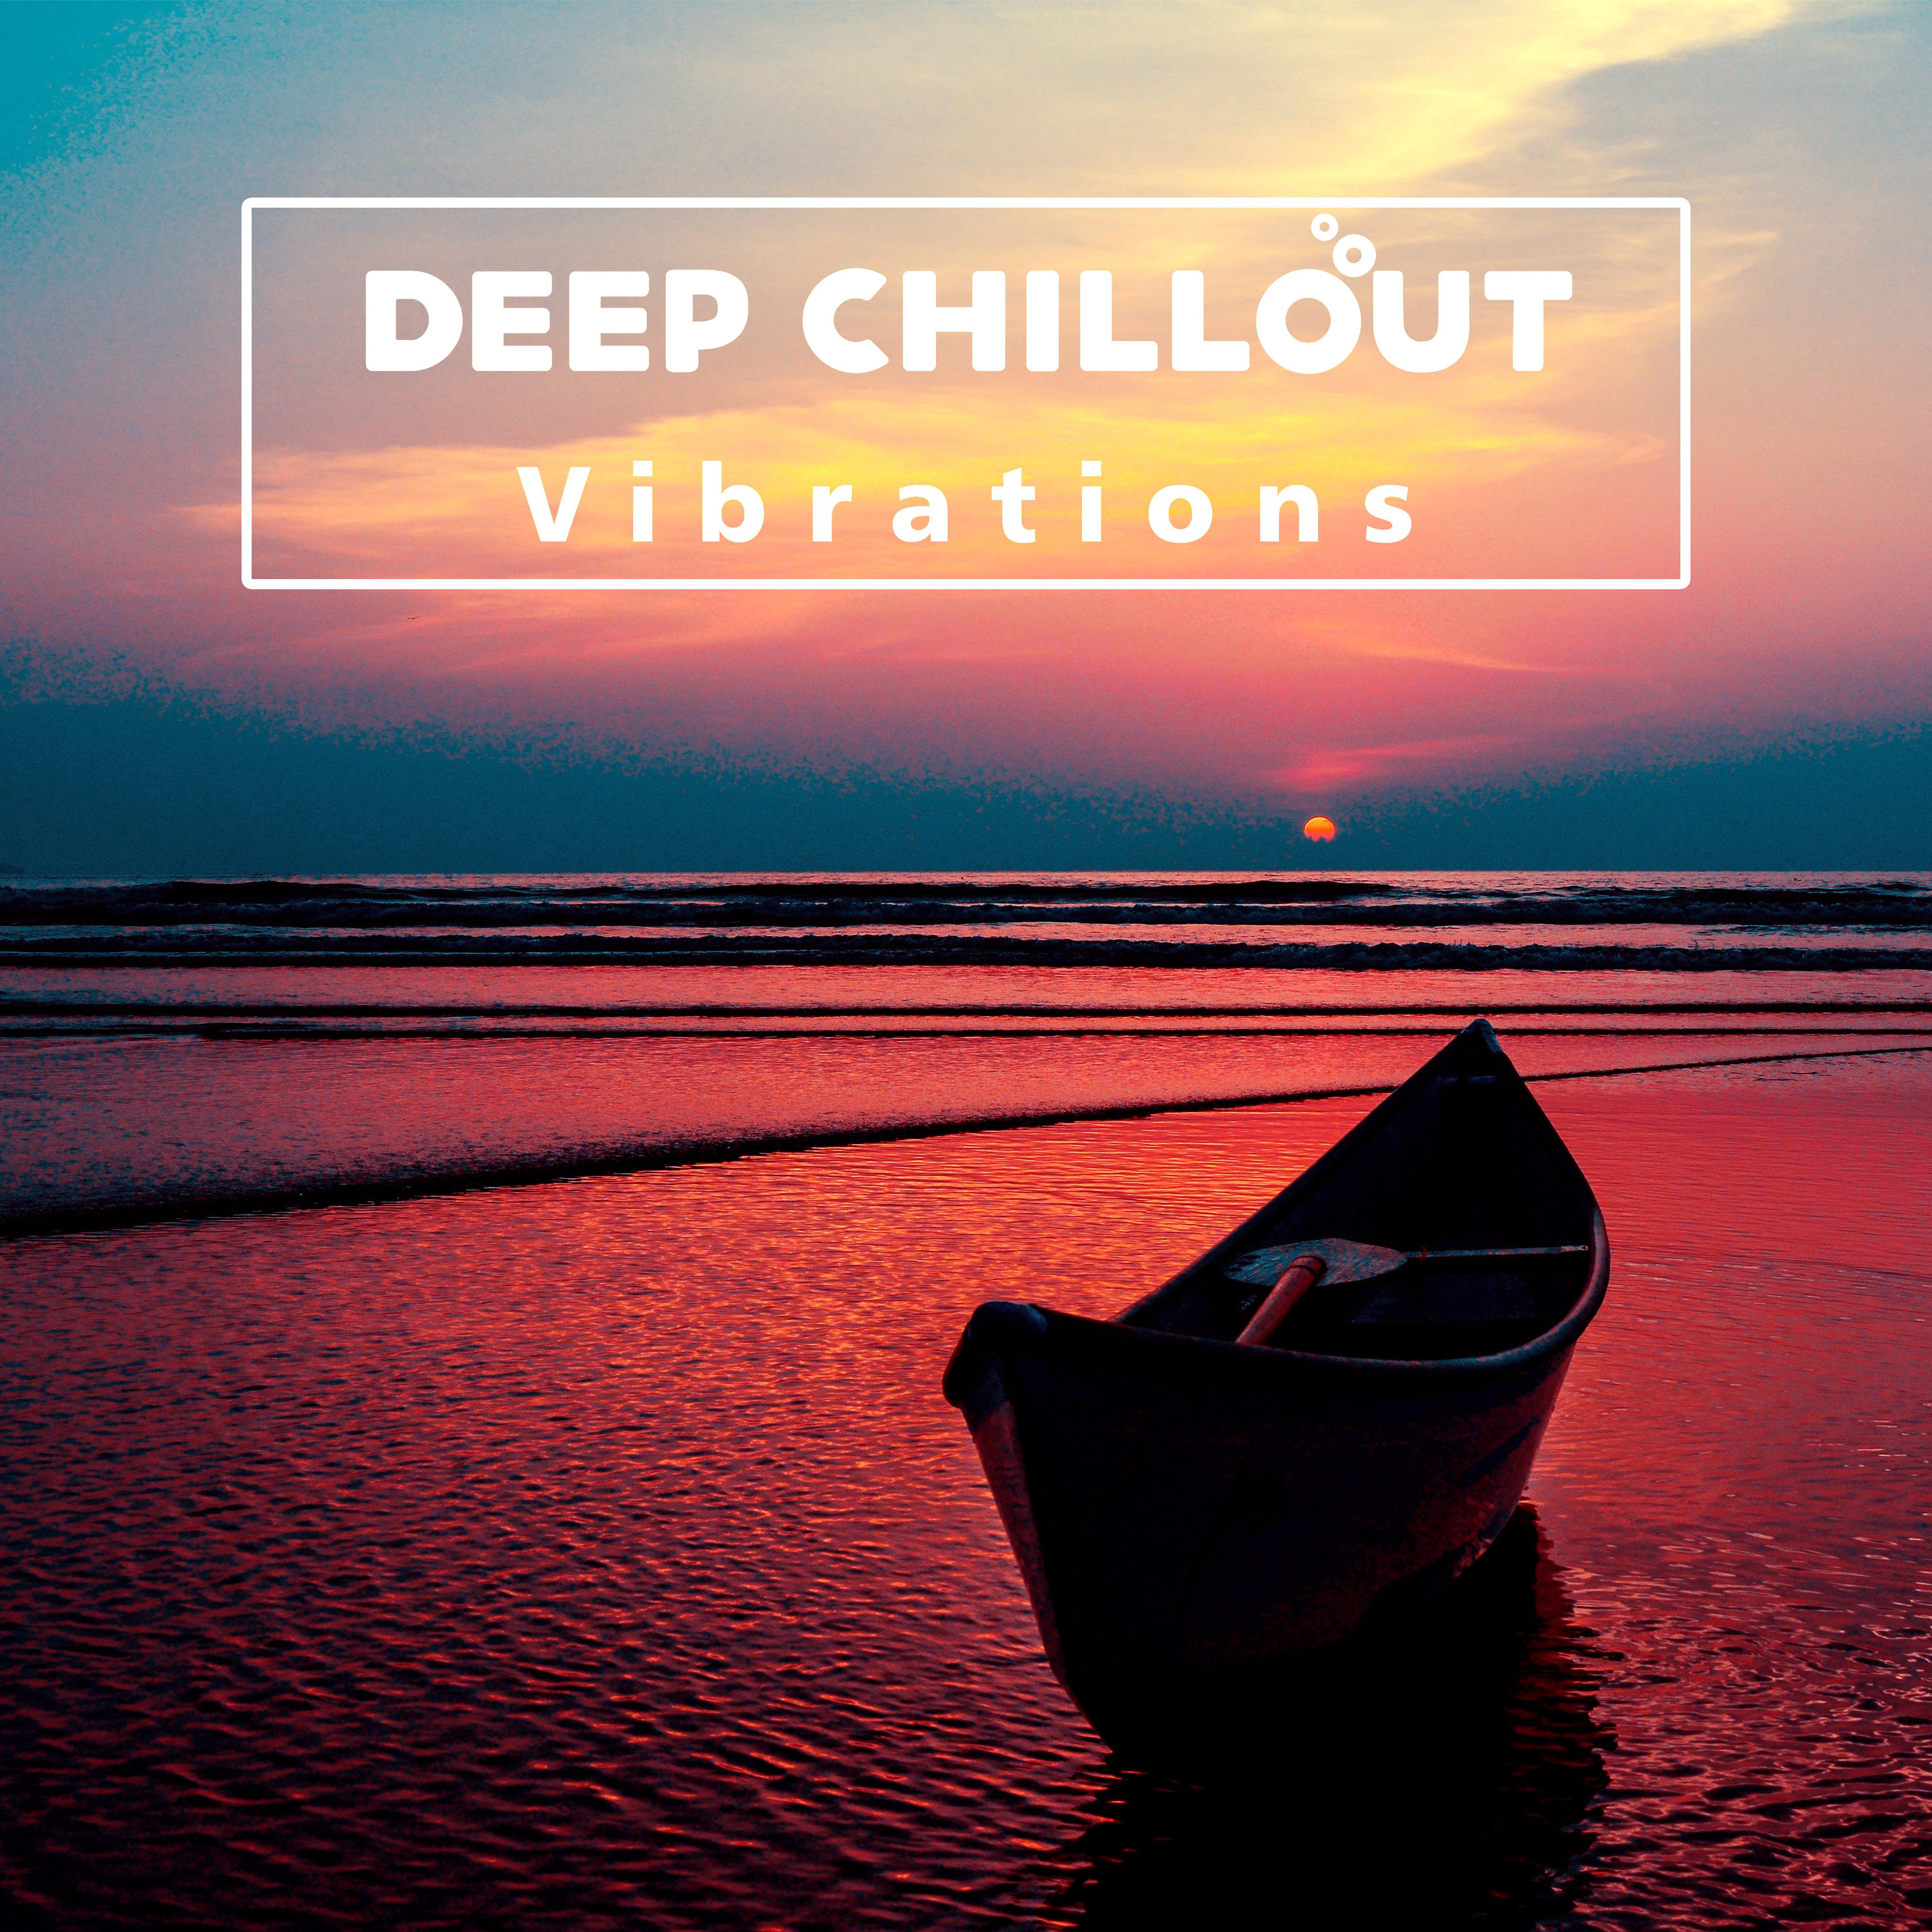 Deep Chillout Vibrations  Electronic Music, Ambient Lounge, Downbeat, Summer Vibes 2017